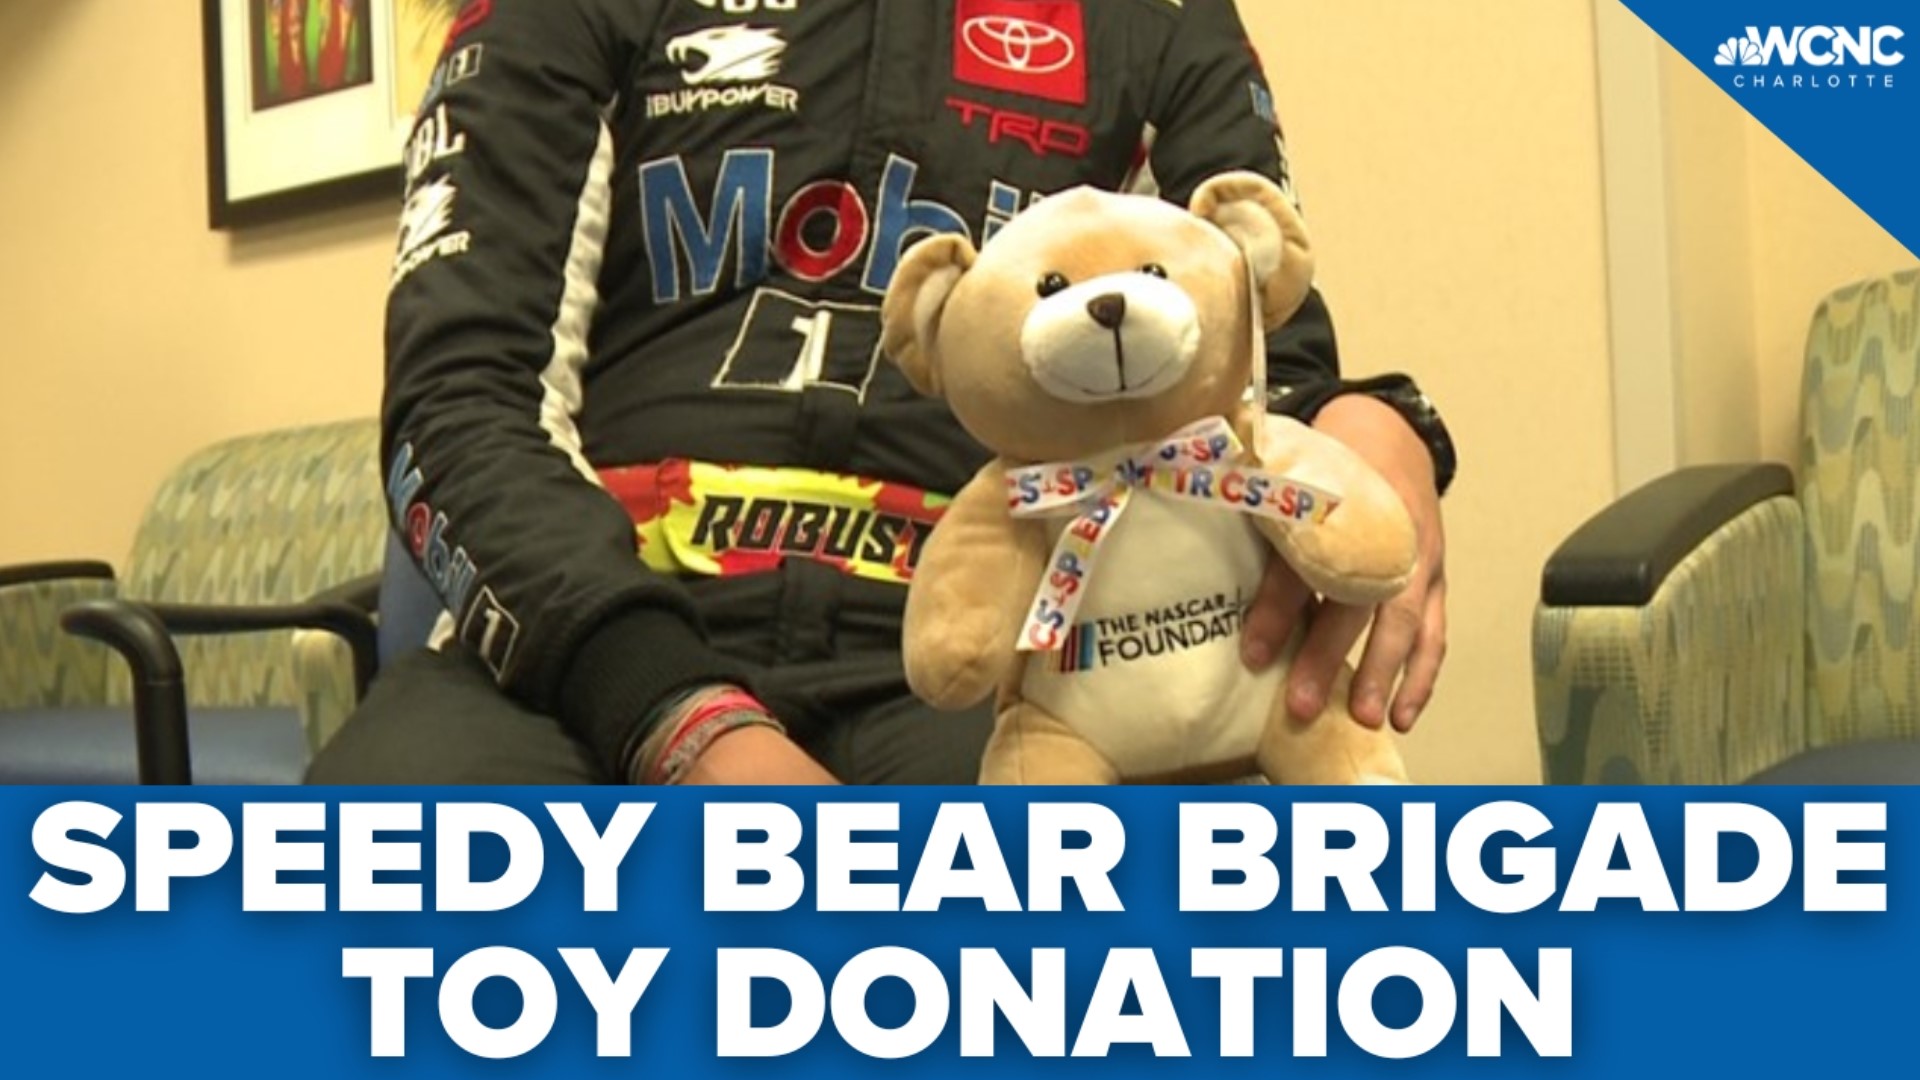 The NASCAR Foundation kicked off its annual Speedy Bear Brigade where they drop off teddy bears to patients at local children's hospitals.